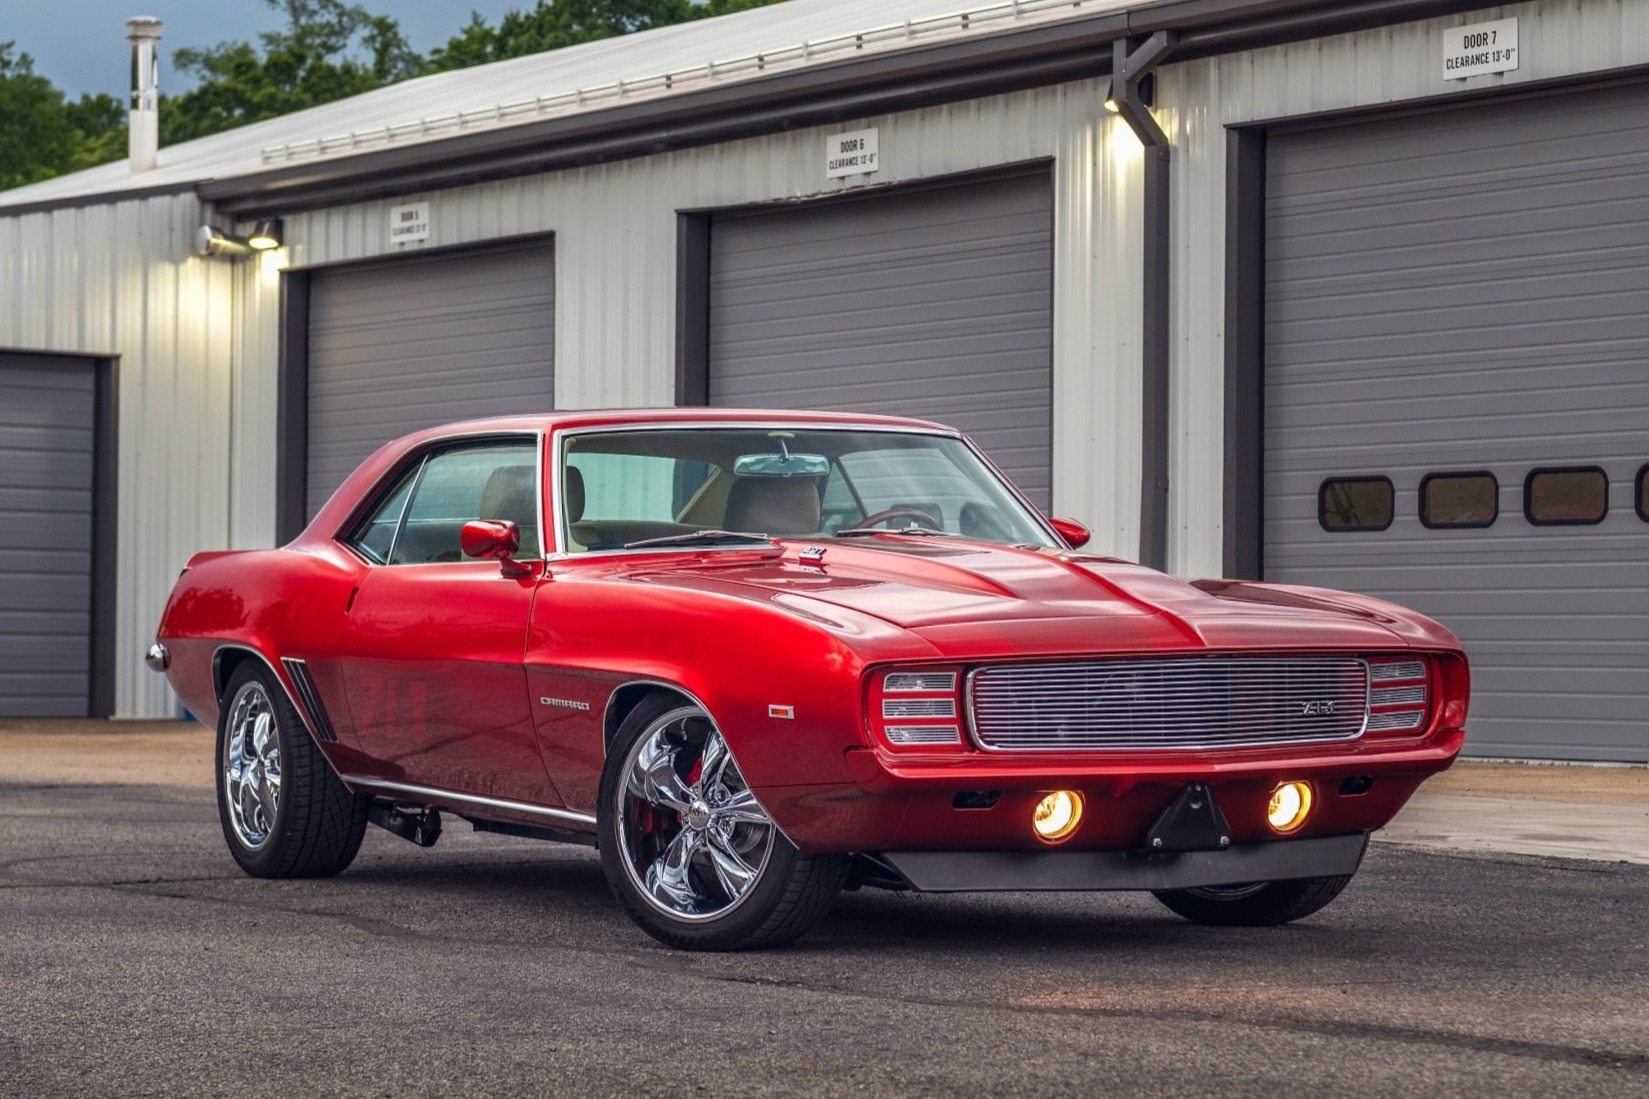 Used 427-Powered 1969 Chevrolet Camaro Coupe 5-Speed Review